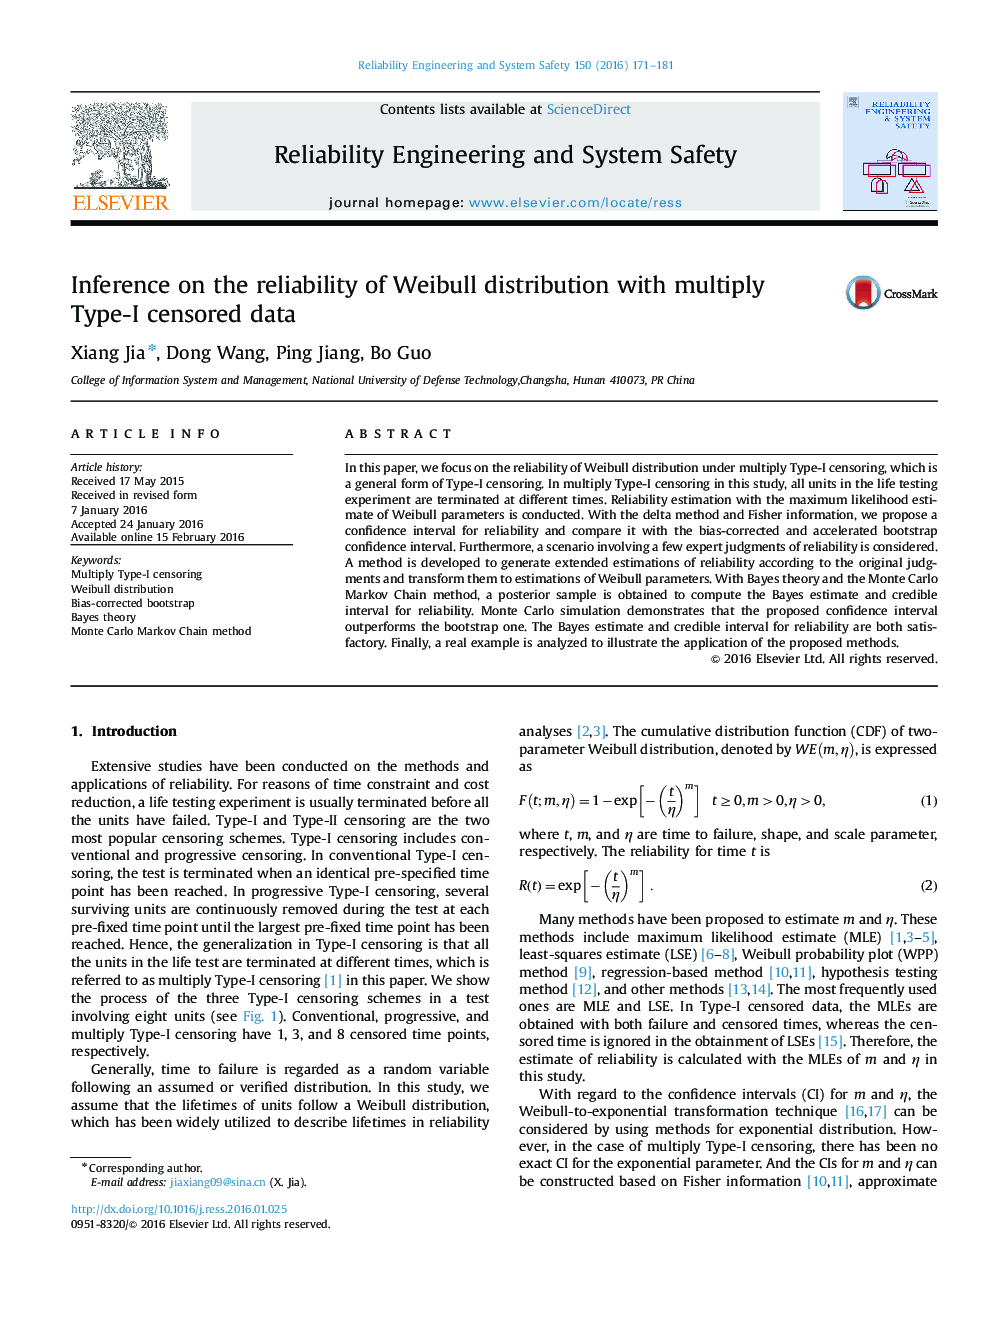 Inference on the reliability of Weibull distribution with multiply Type-I censored data